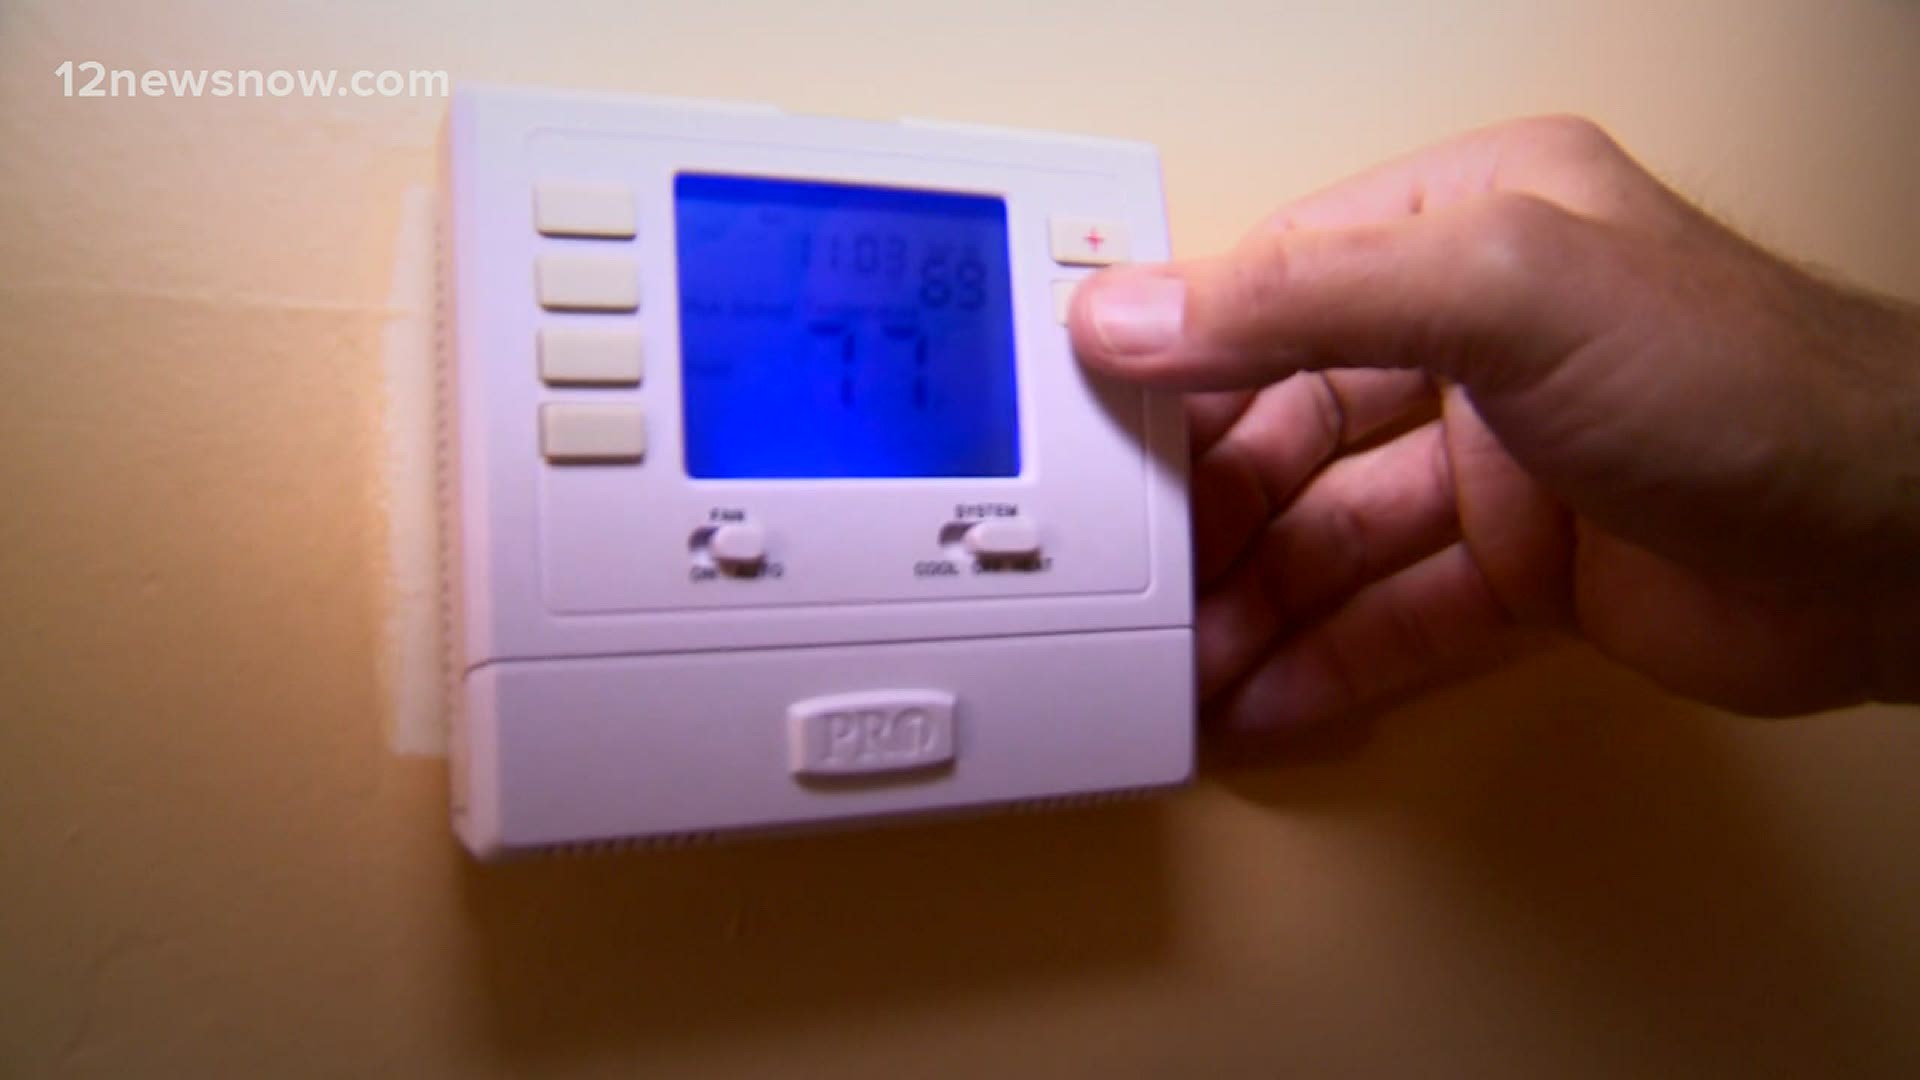 Air conditioning companies say if your home unit goes down, getting parts to repair it, may be a struggle.